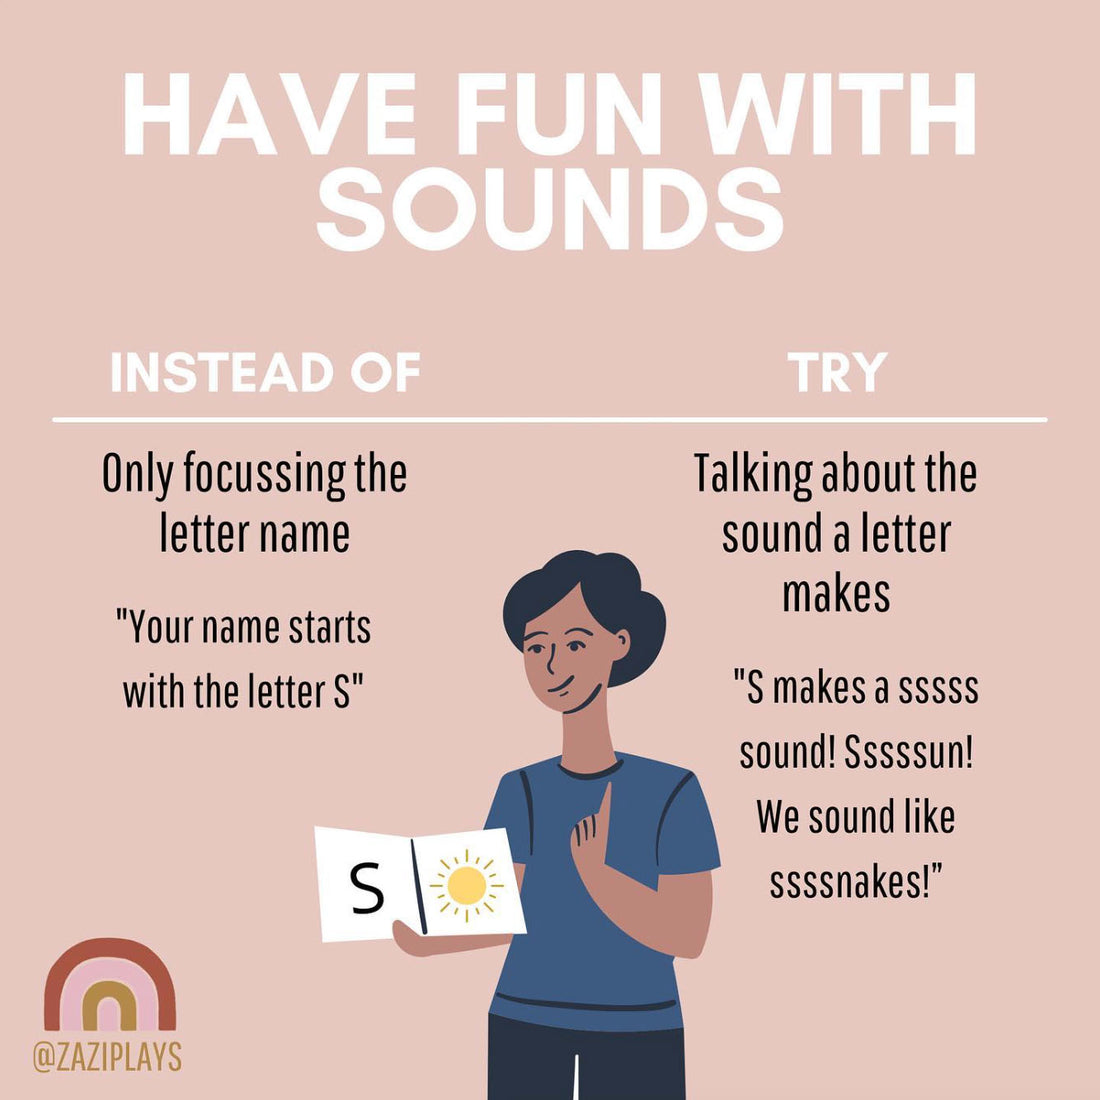 Have fun with sounds